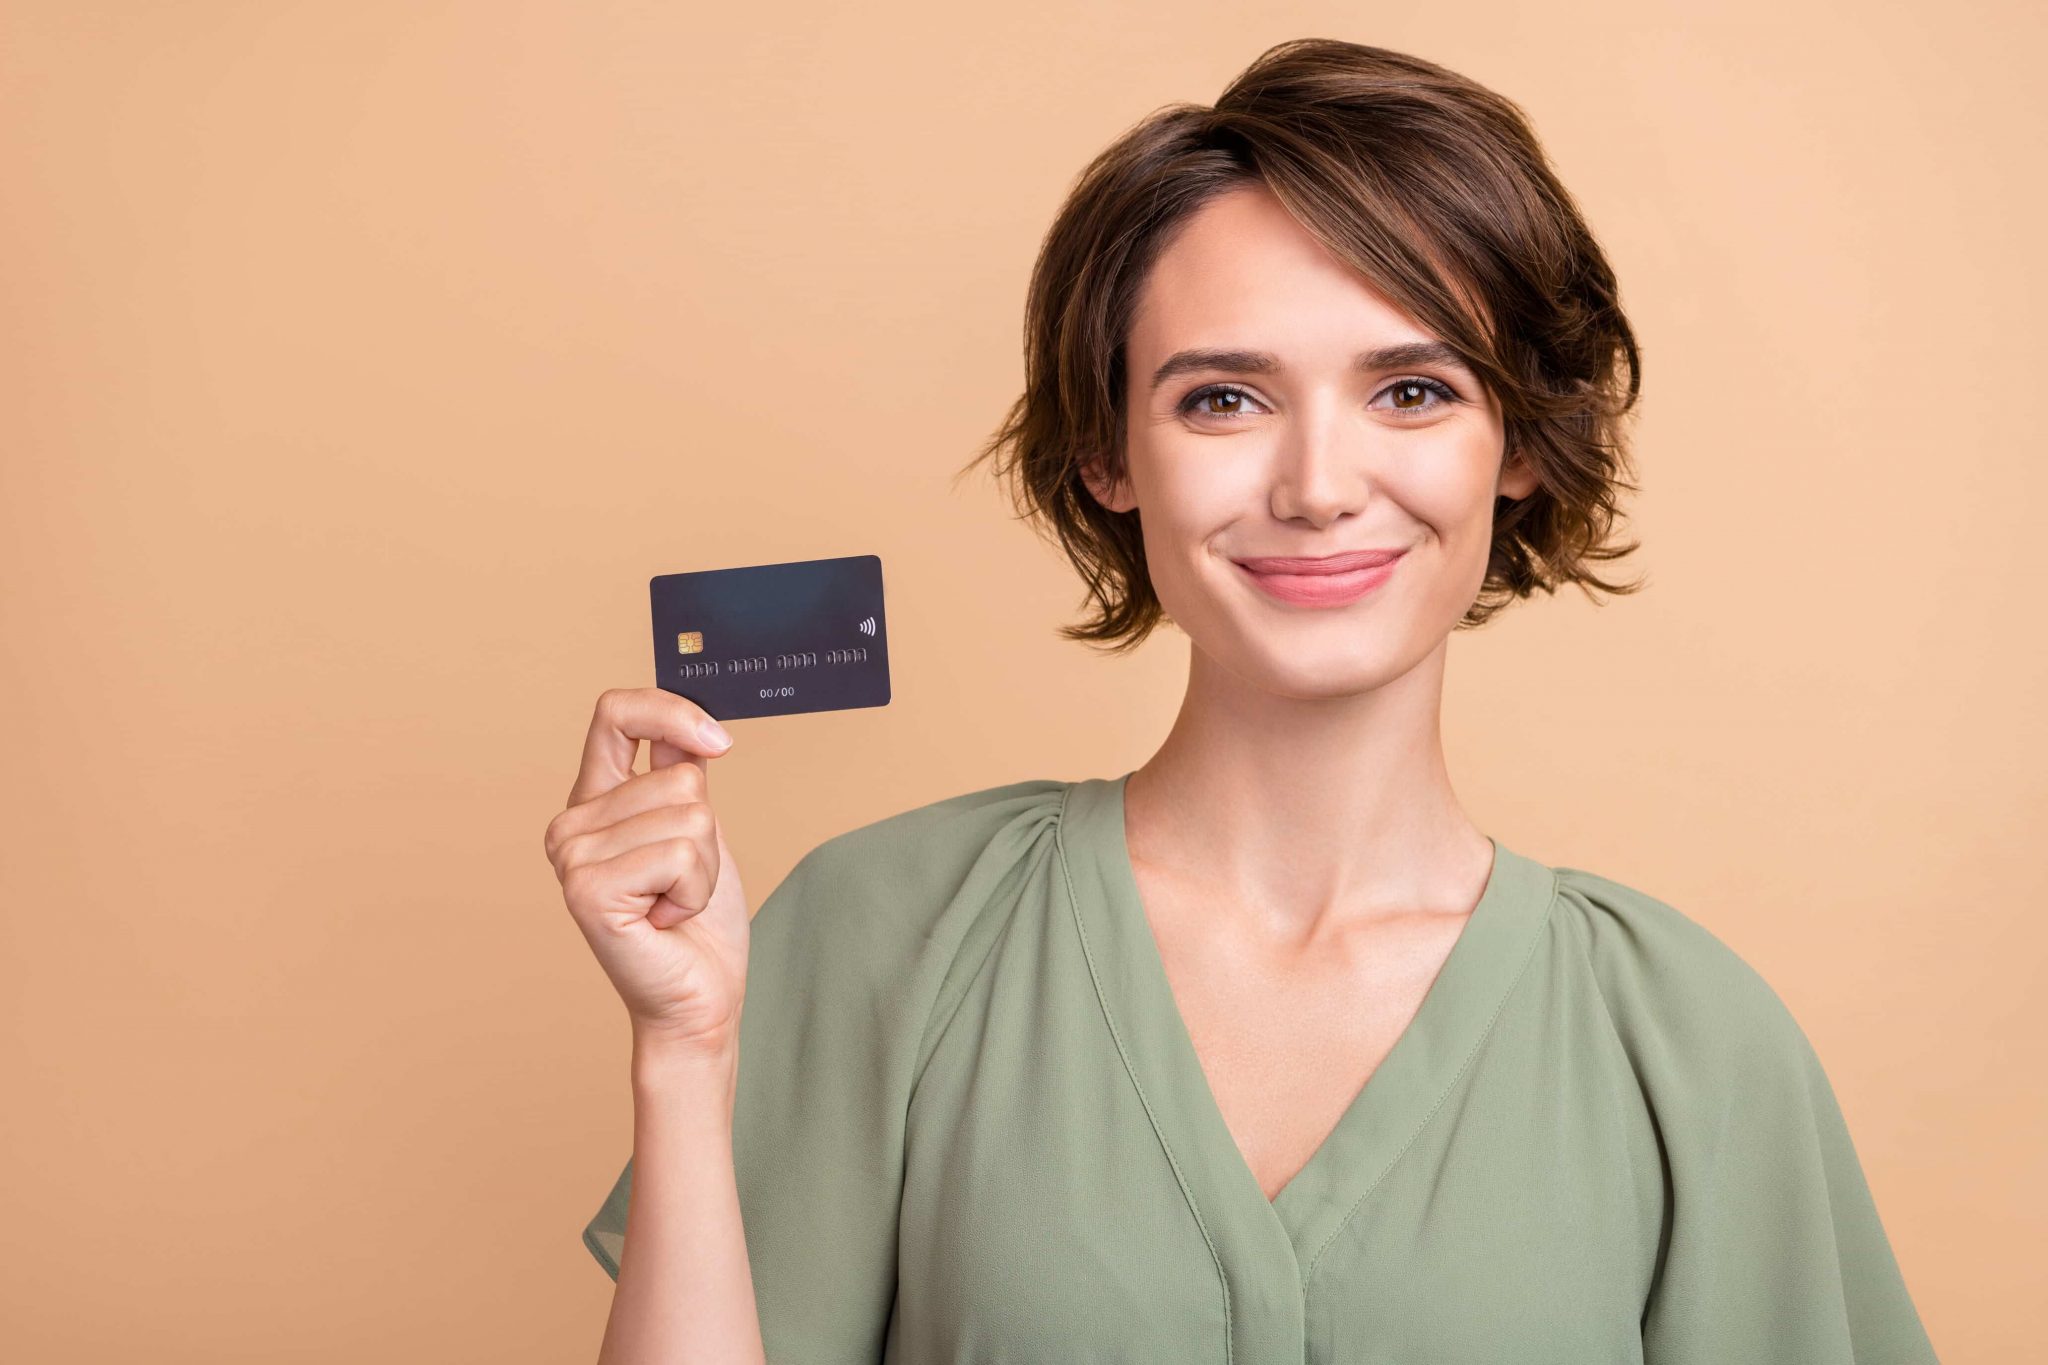 A woman holding a debit card with a BIN number on it 